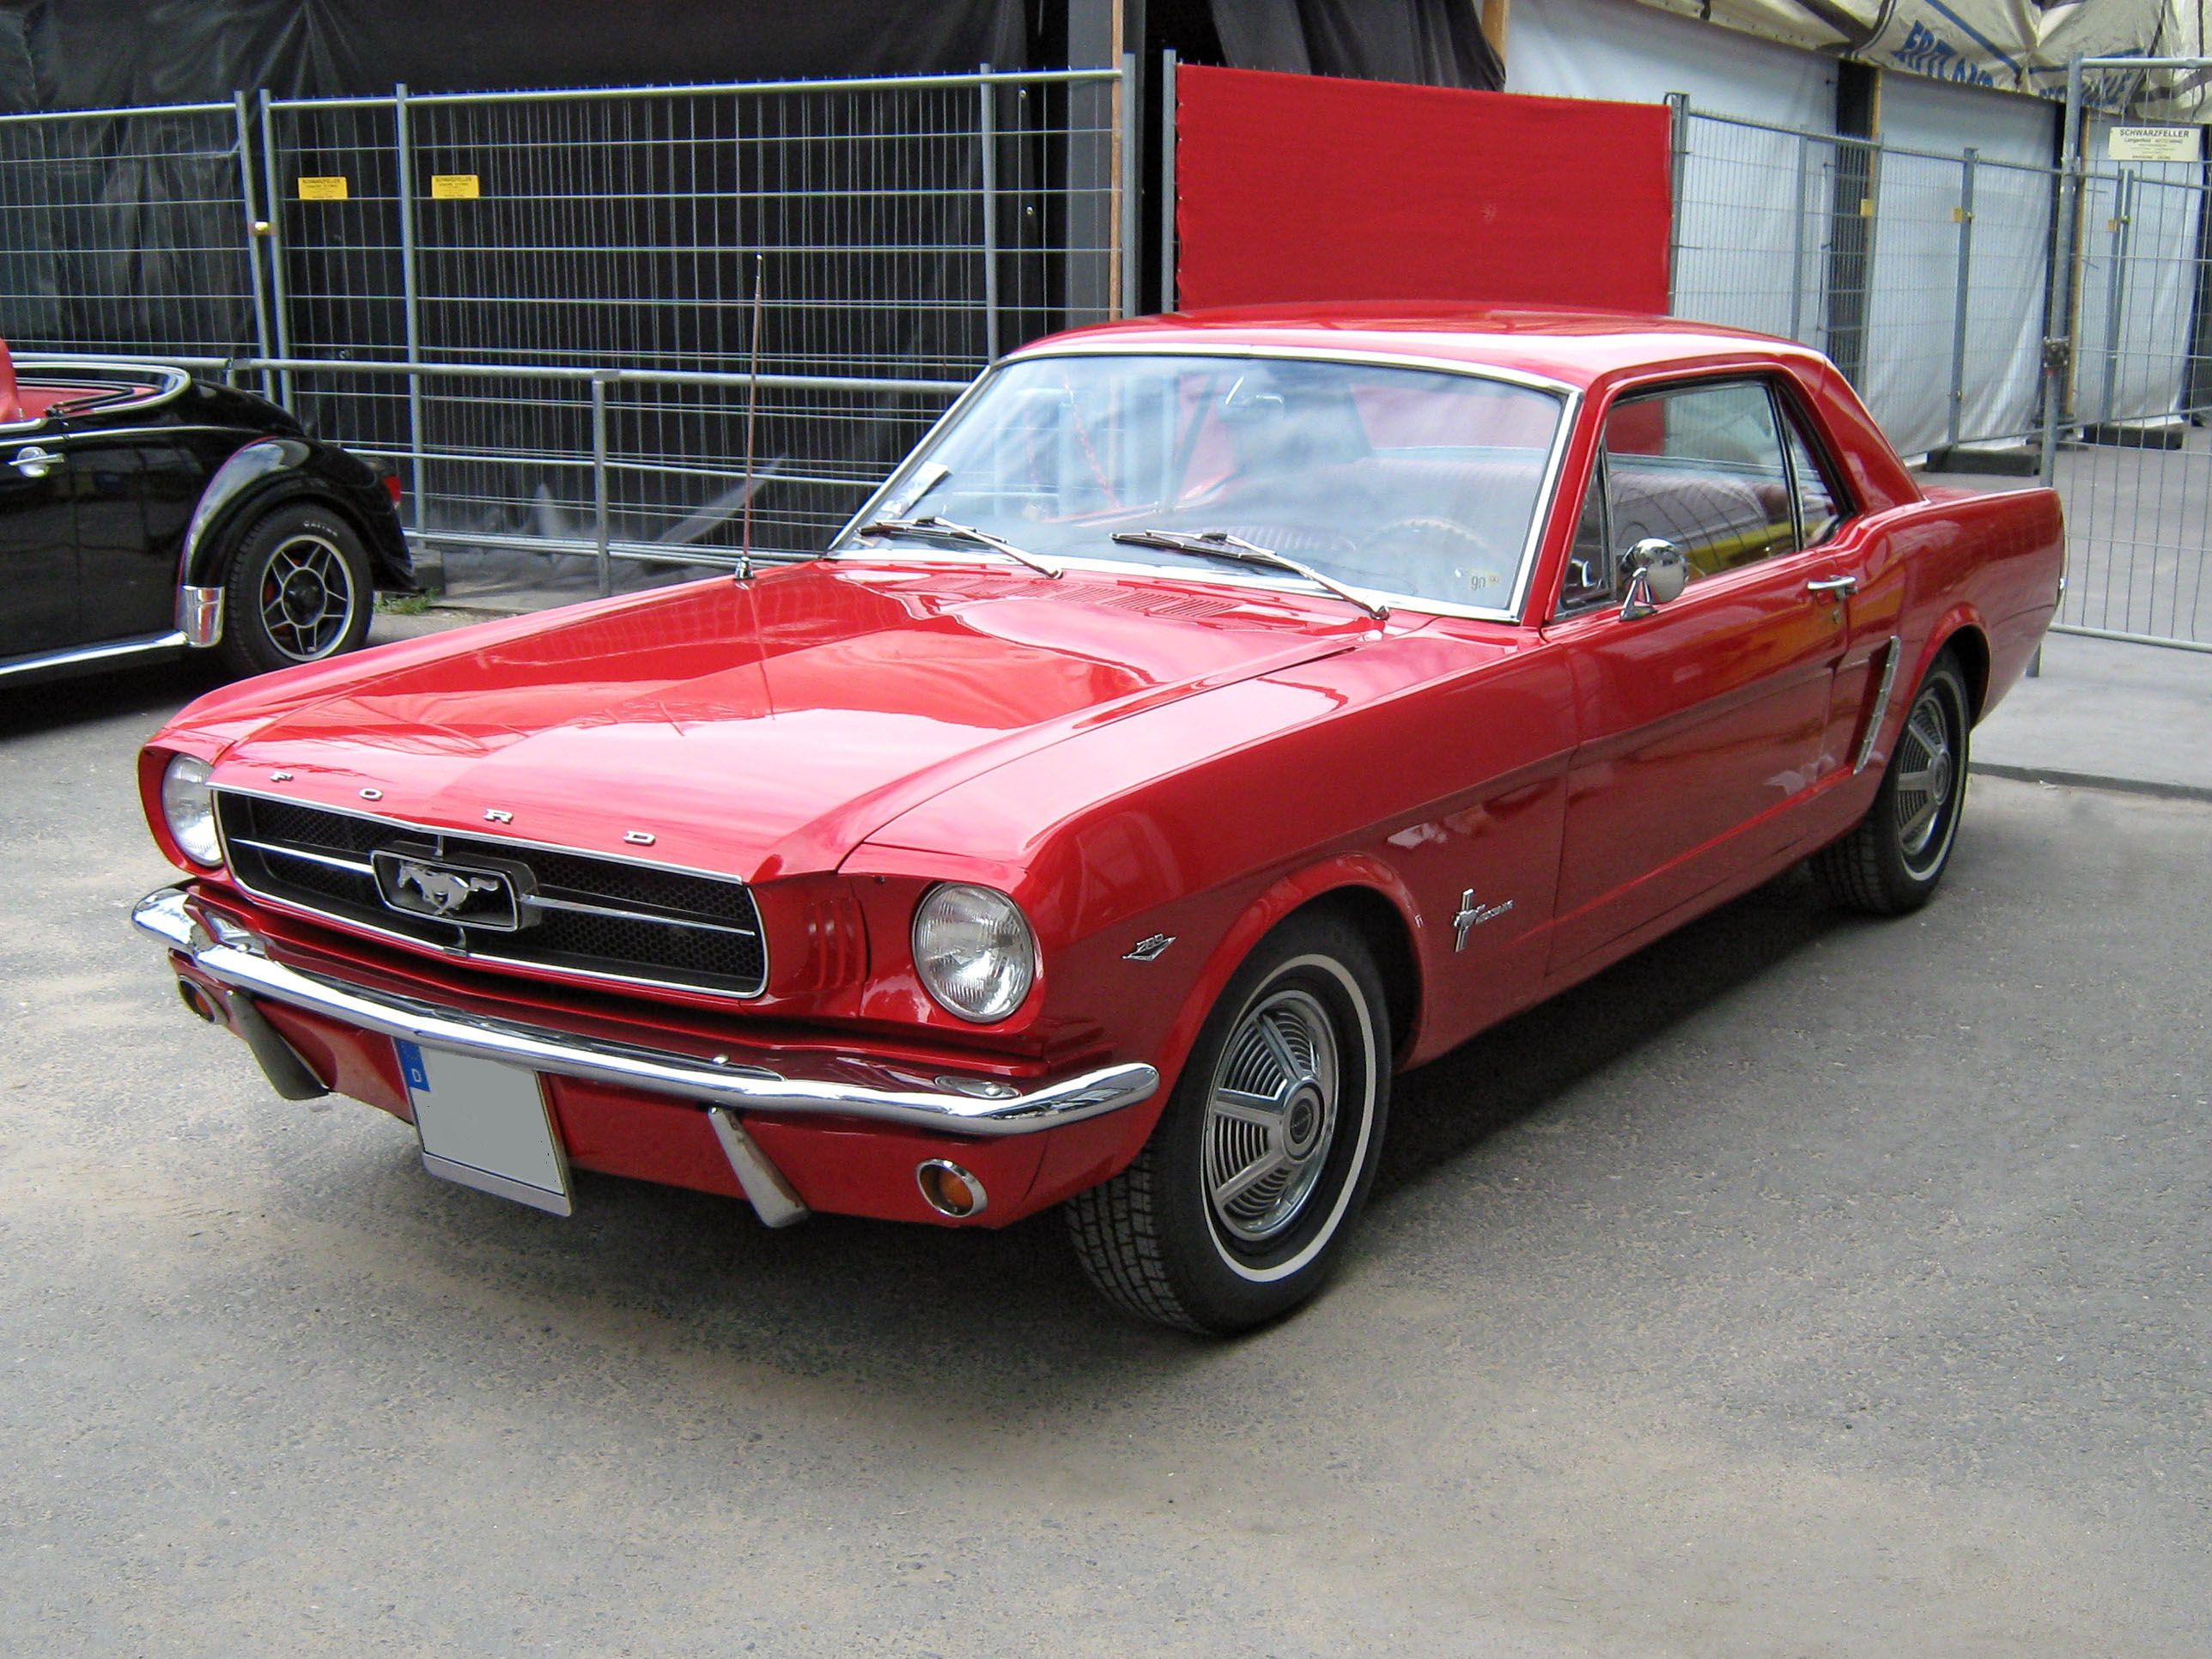 red Mustang with trunk open